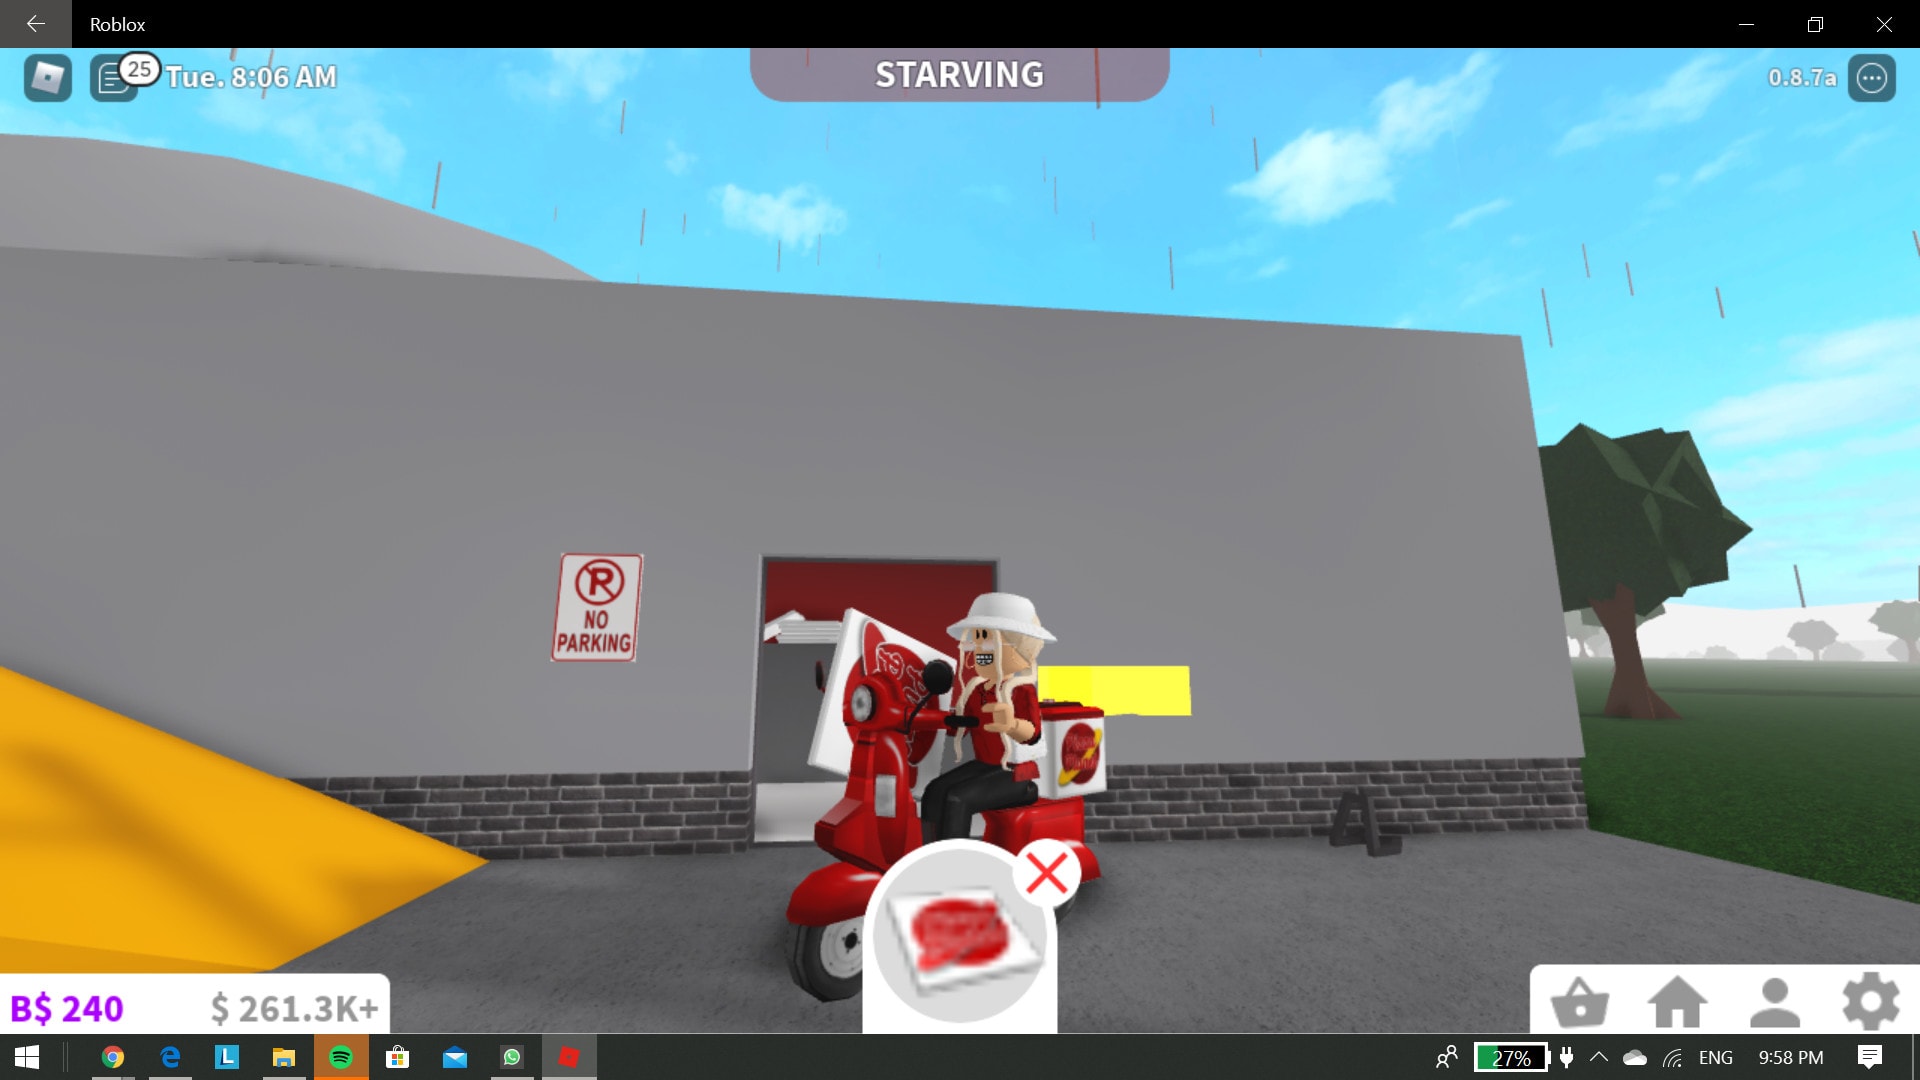 Give You 100k On Bloxburg By Axyriaa Fiverr - how much robux is 100k in bloxburg